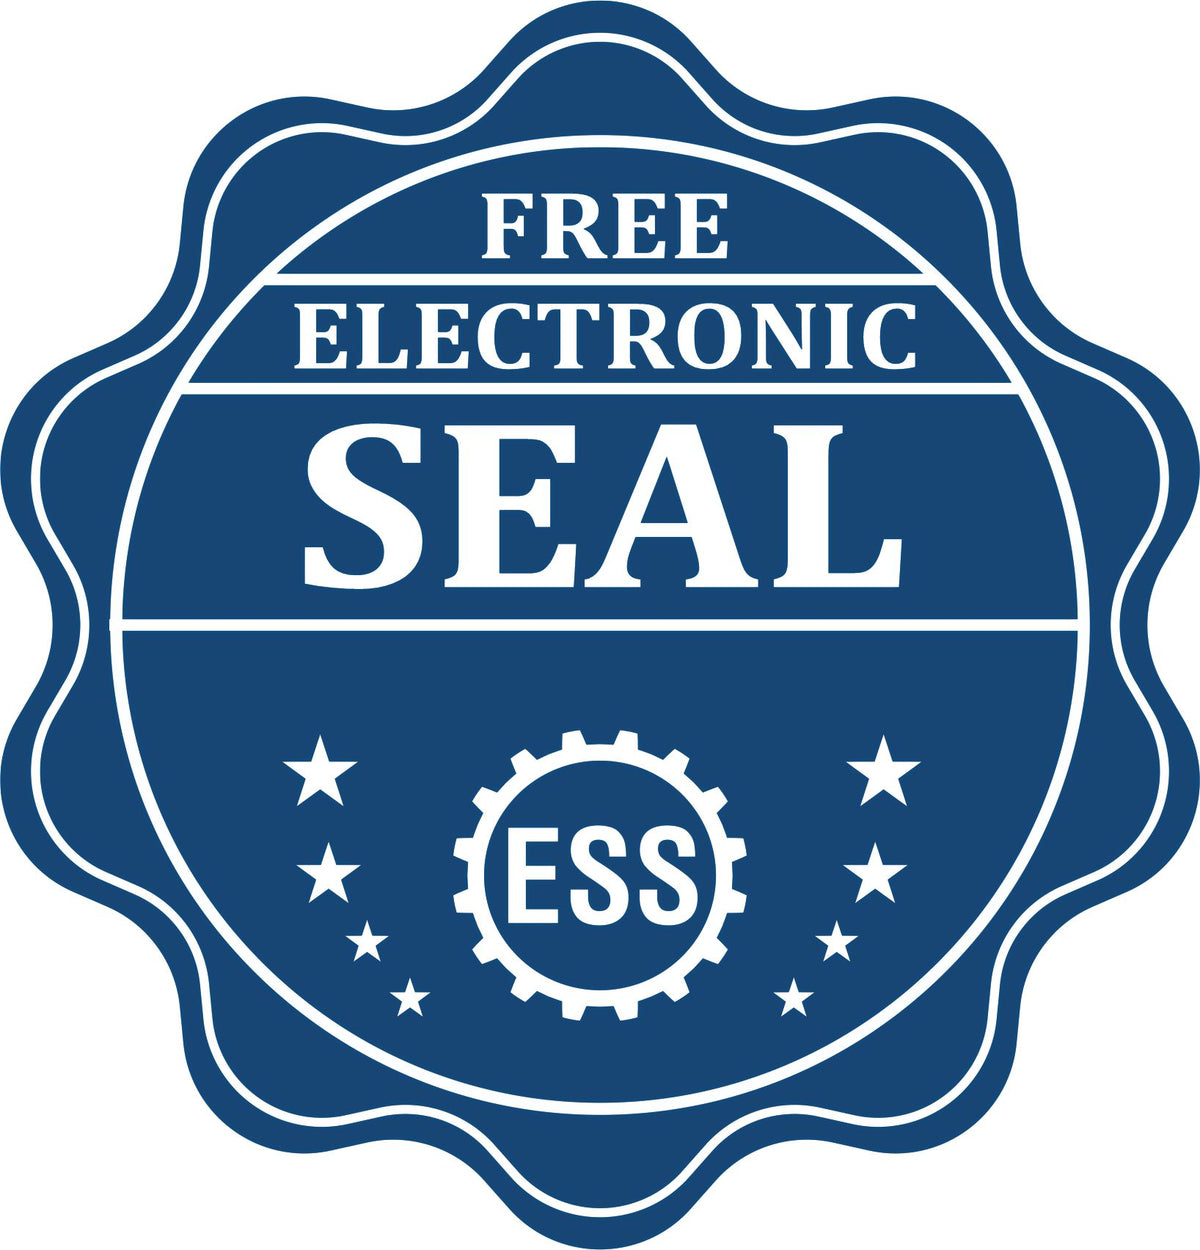 A badge showing a free electronic seal for the Long Reach Kansas PE Seal with stars and the ESS gear on the emblem.